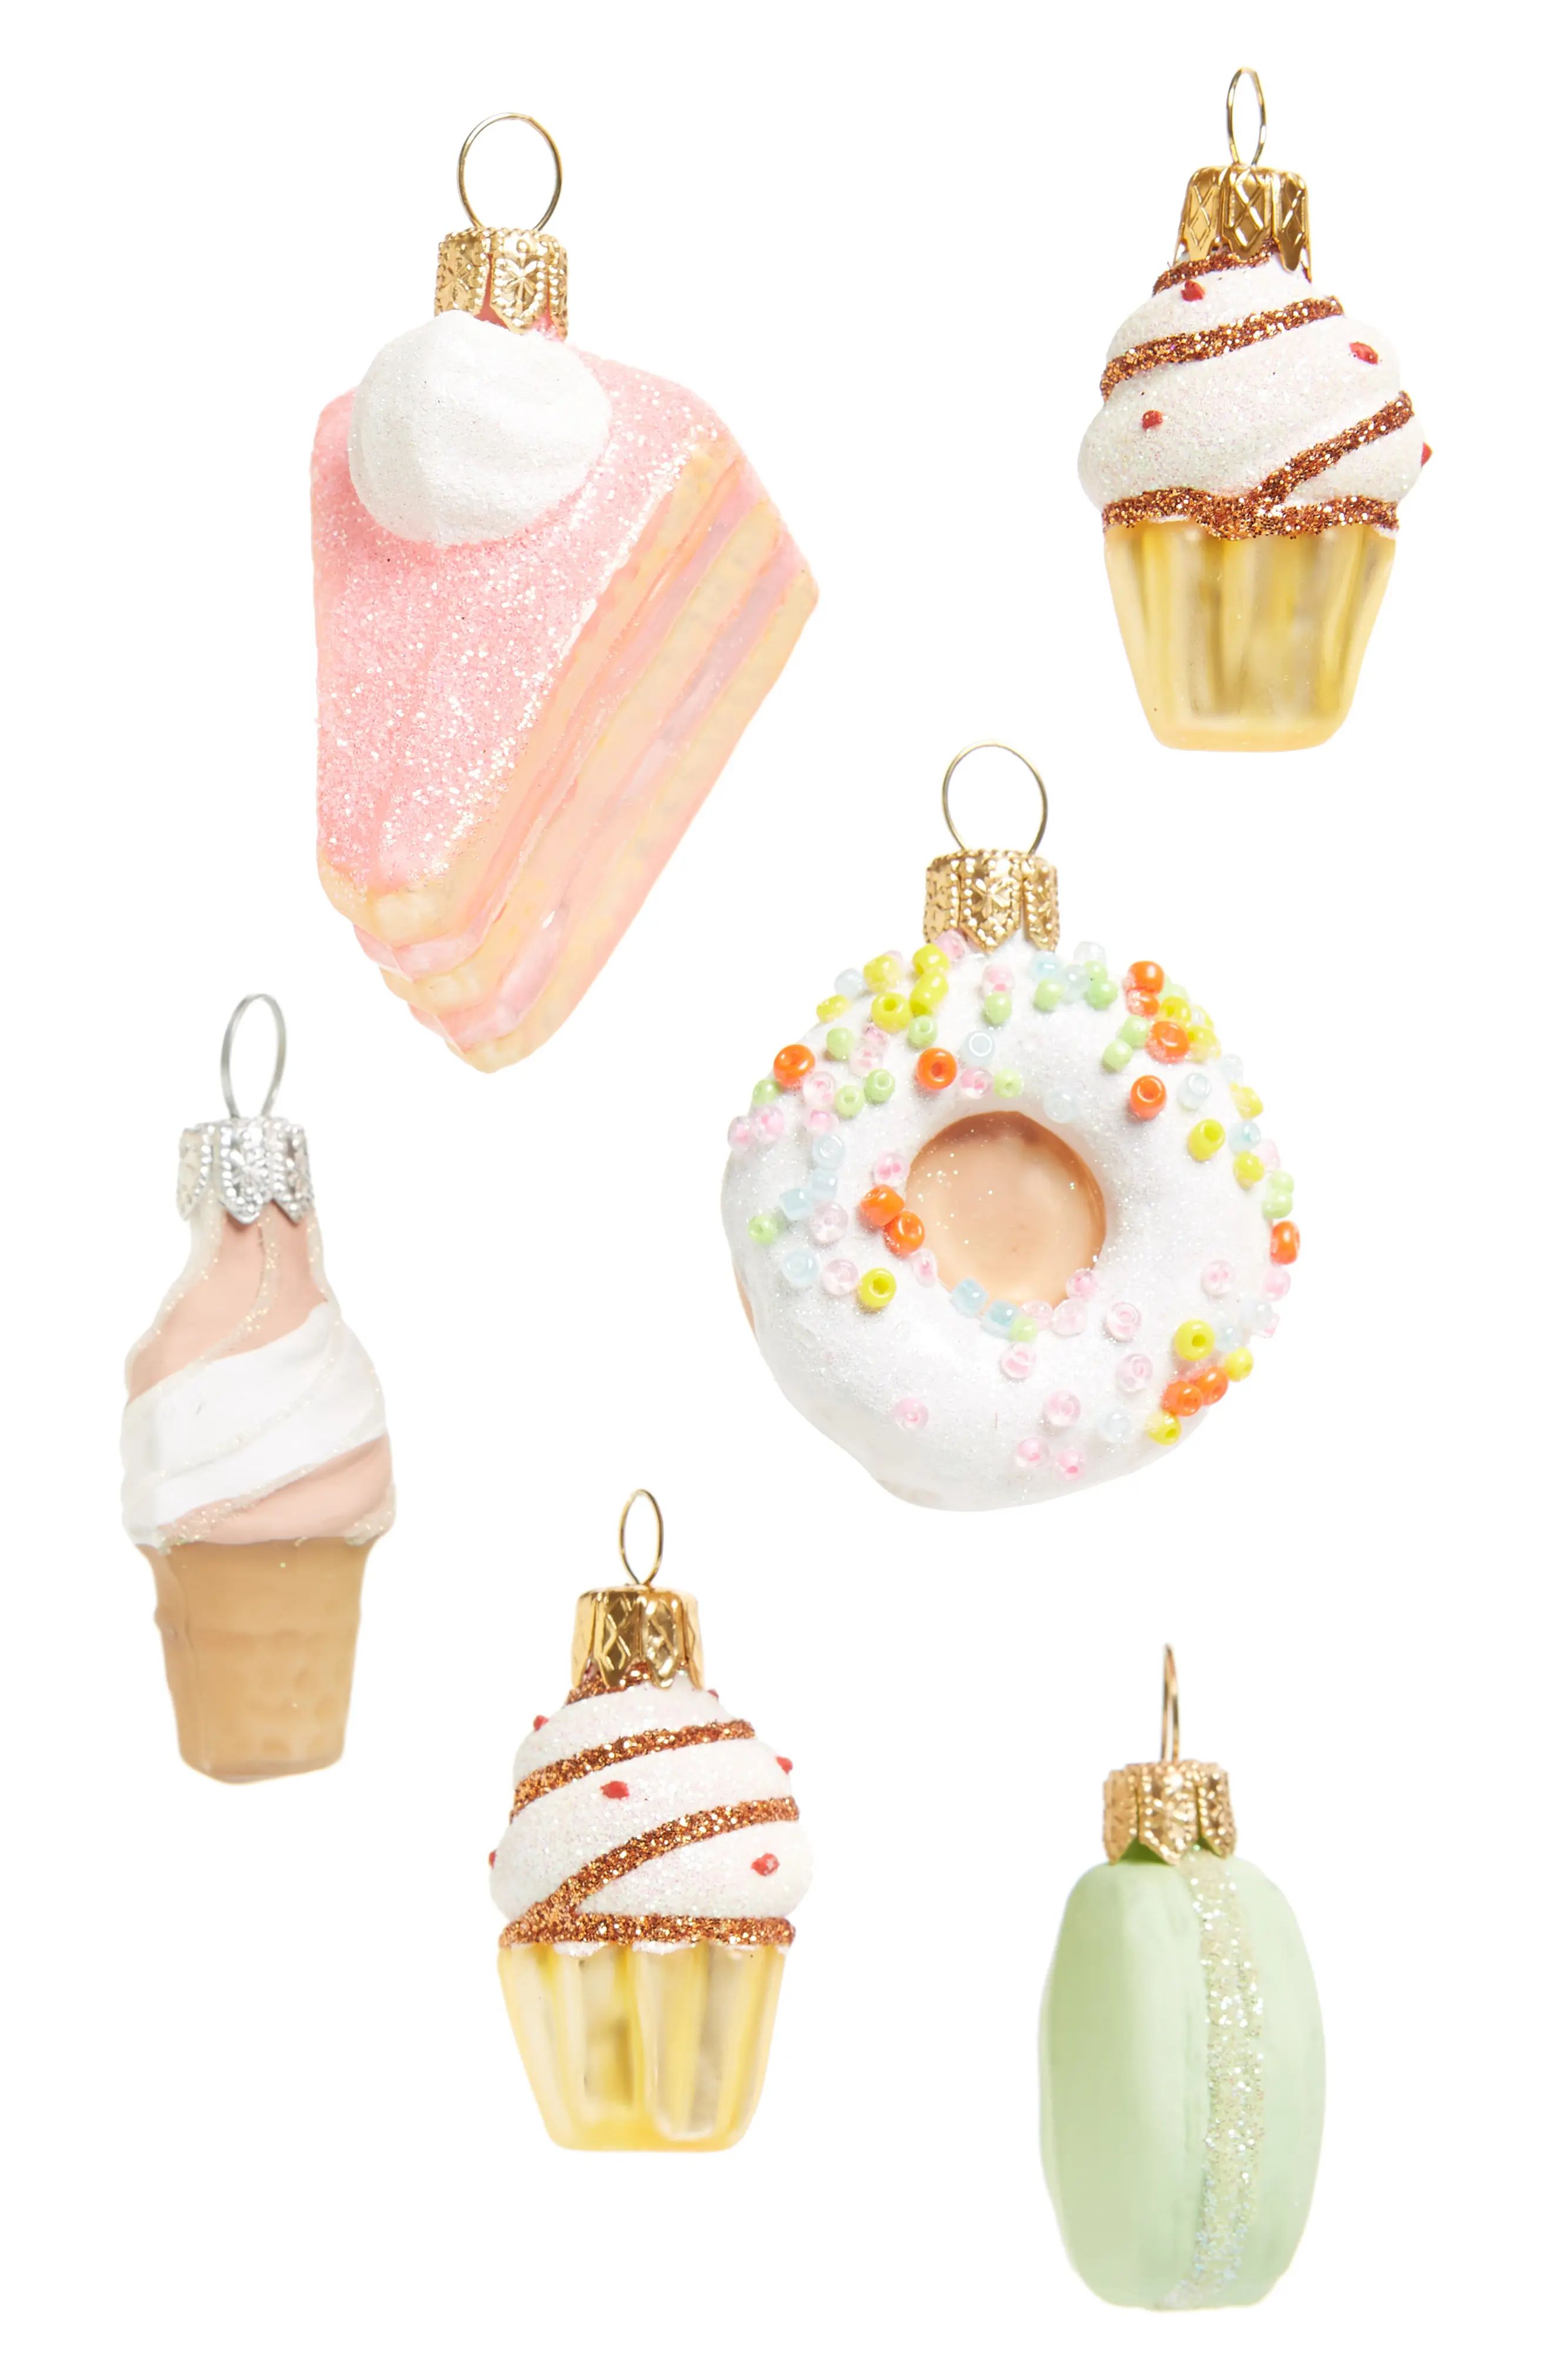 Nordstrom at Home Sweets Set of 6 Mini Ornaments | Nordstrom